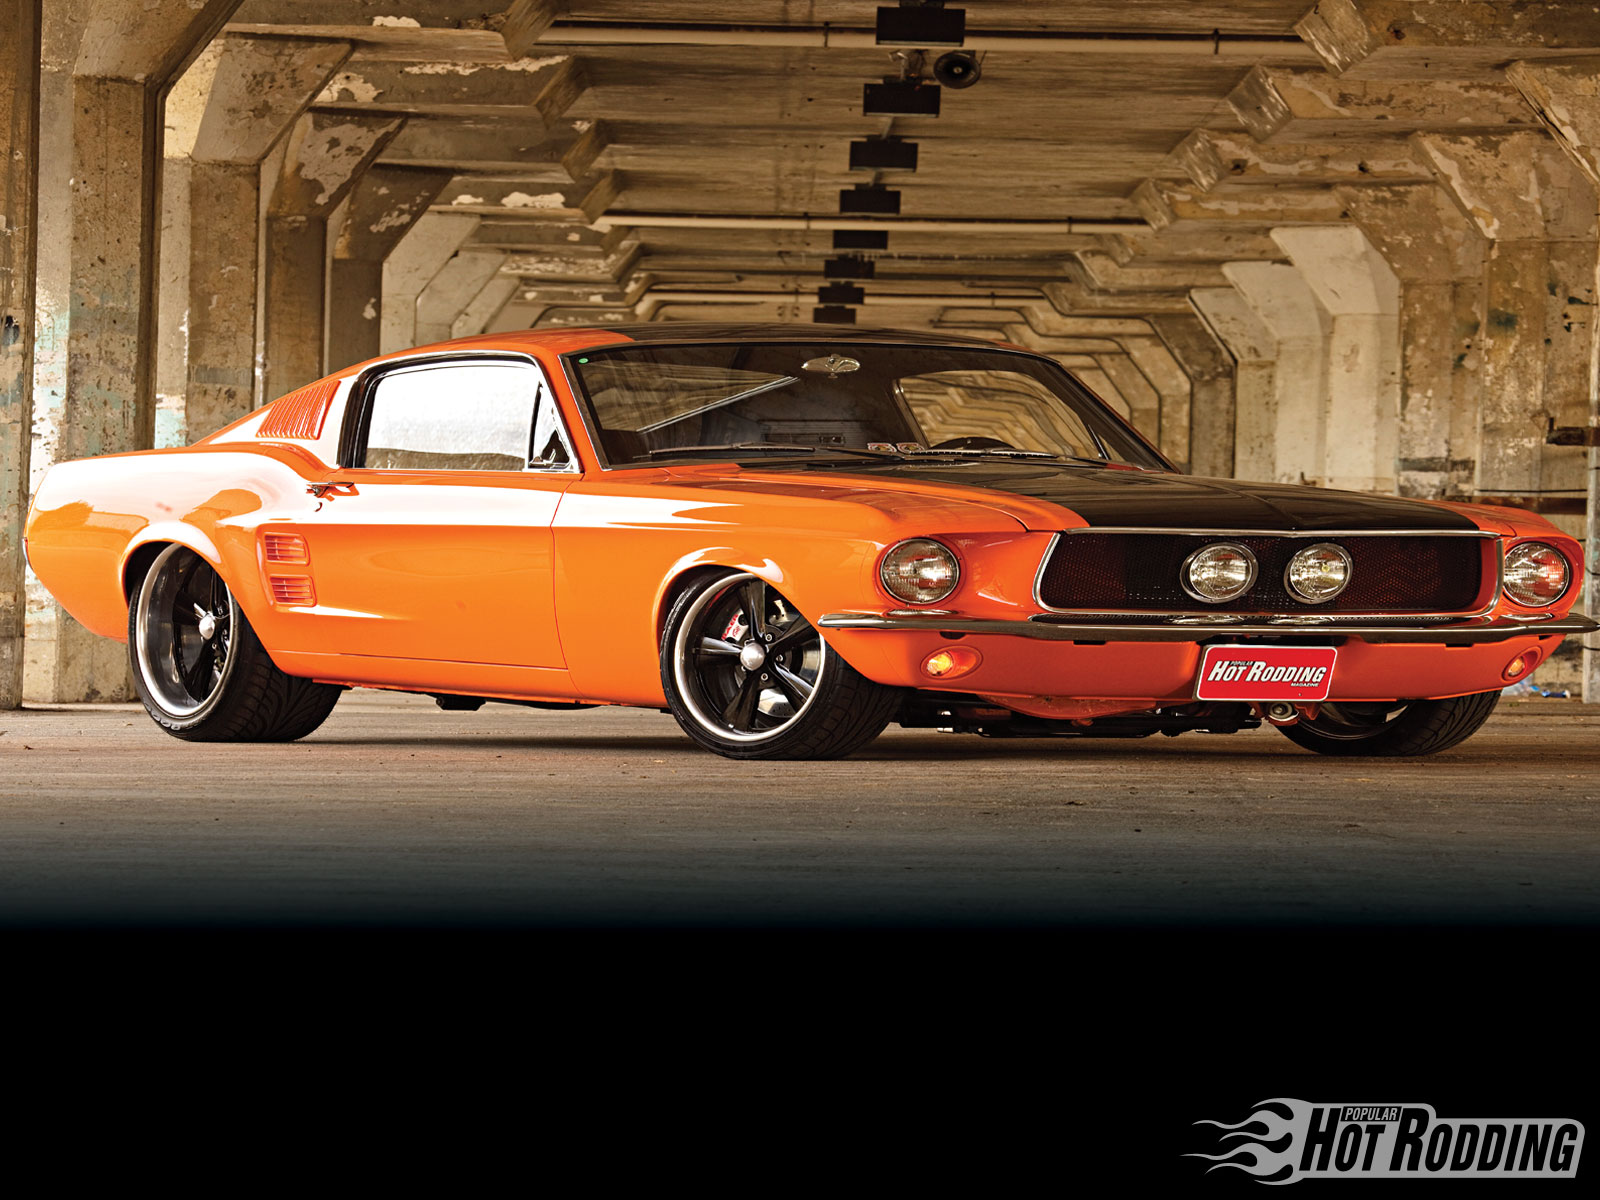 1967 Ford Mustang Fastback Bakgrund And Bakgrund 1600x1200